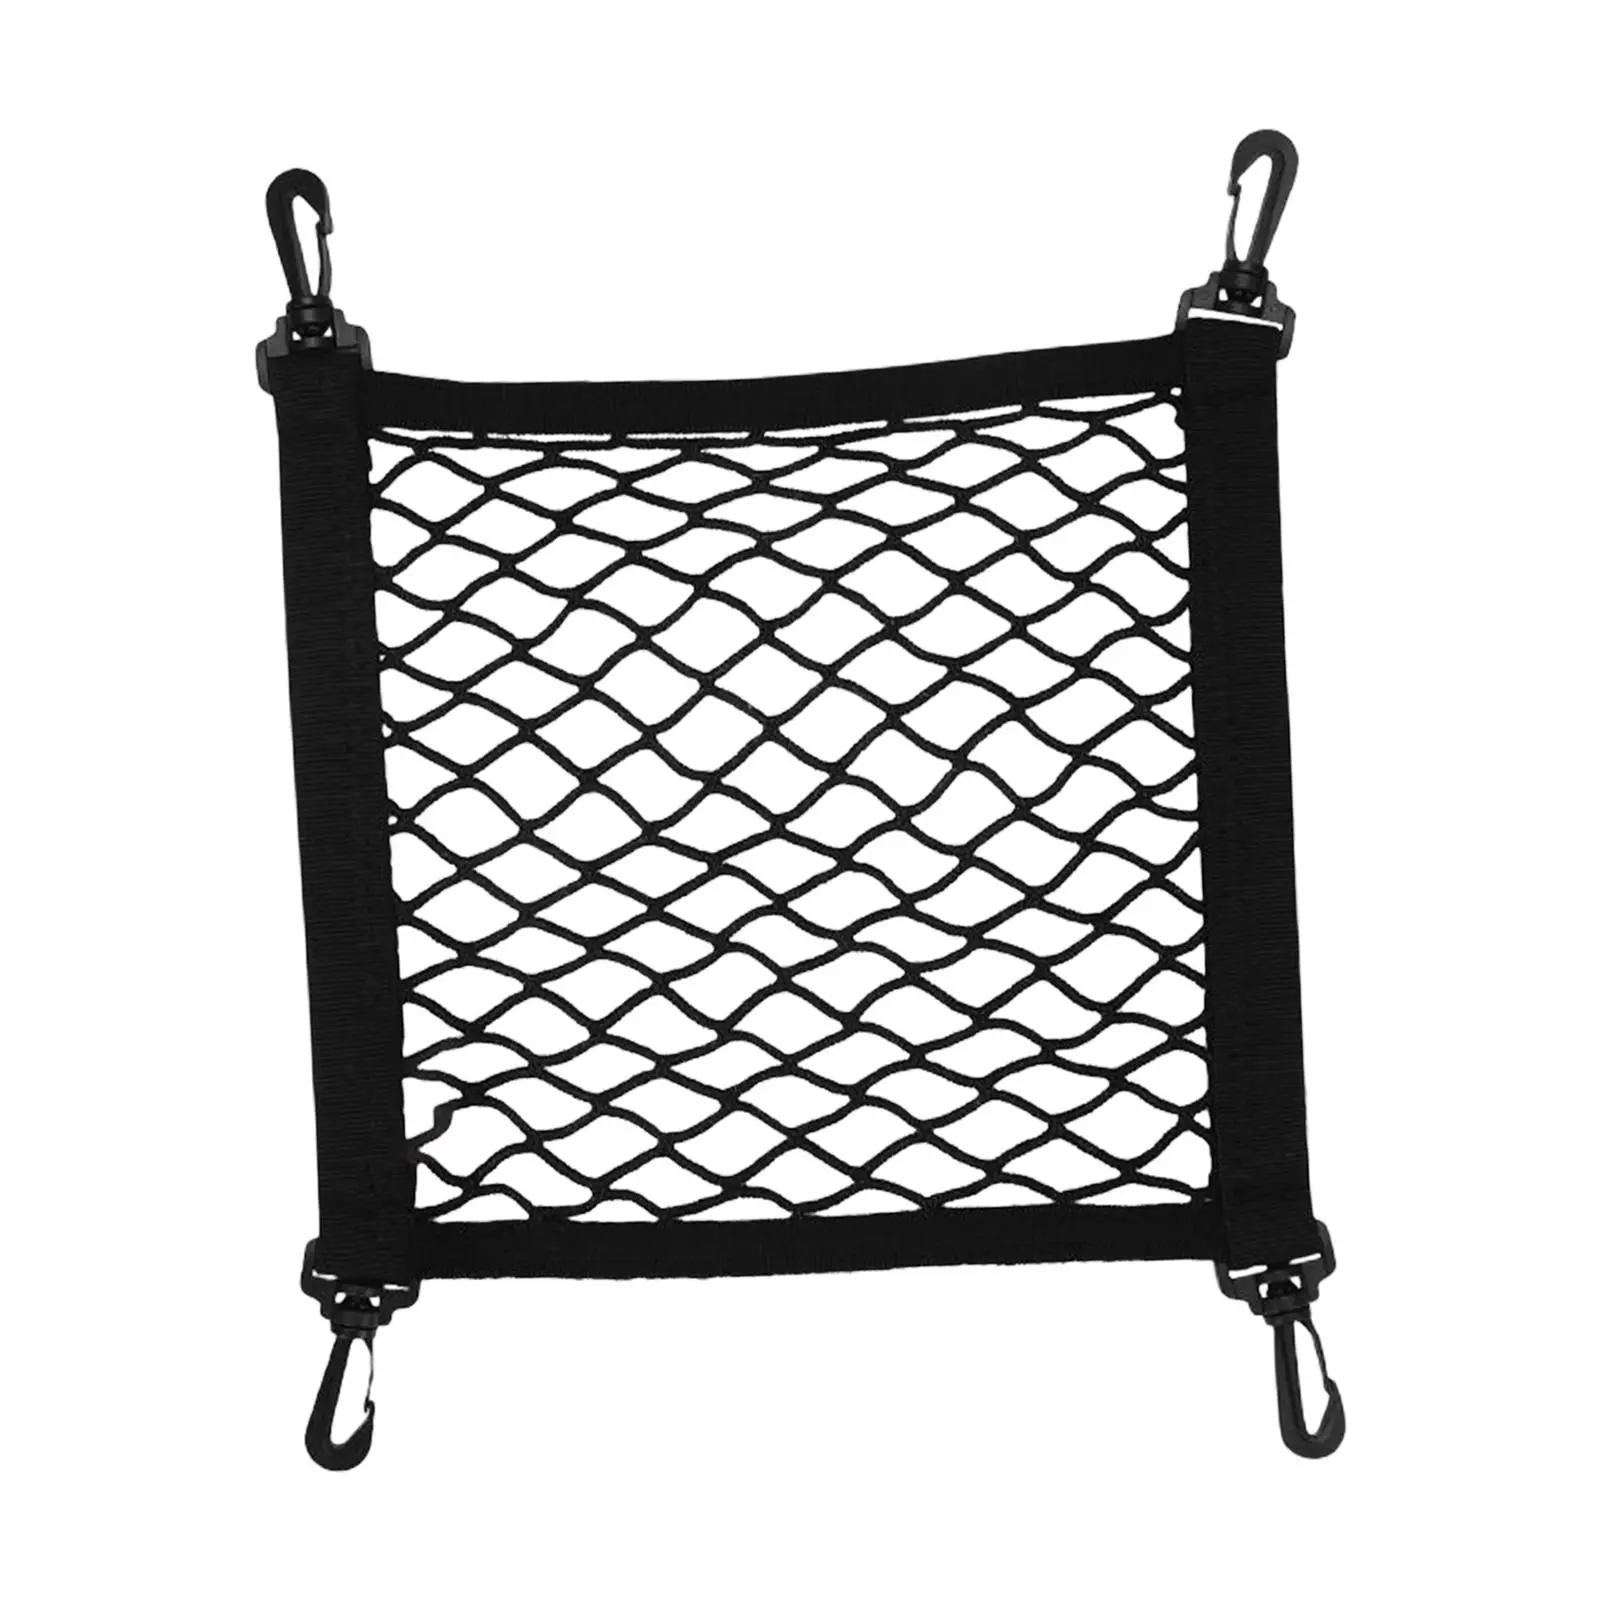 Single Layer Electric Vehicle Net Mesh Bag Heavy Duty Car Accessories Stretchable with Hook Durable for for for U+ for US for U1